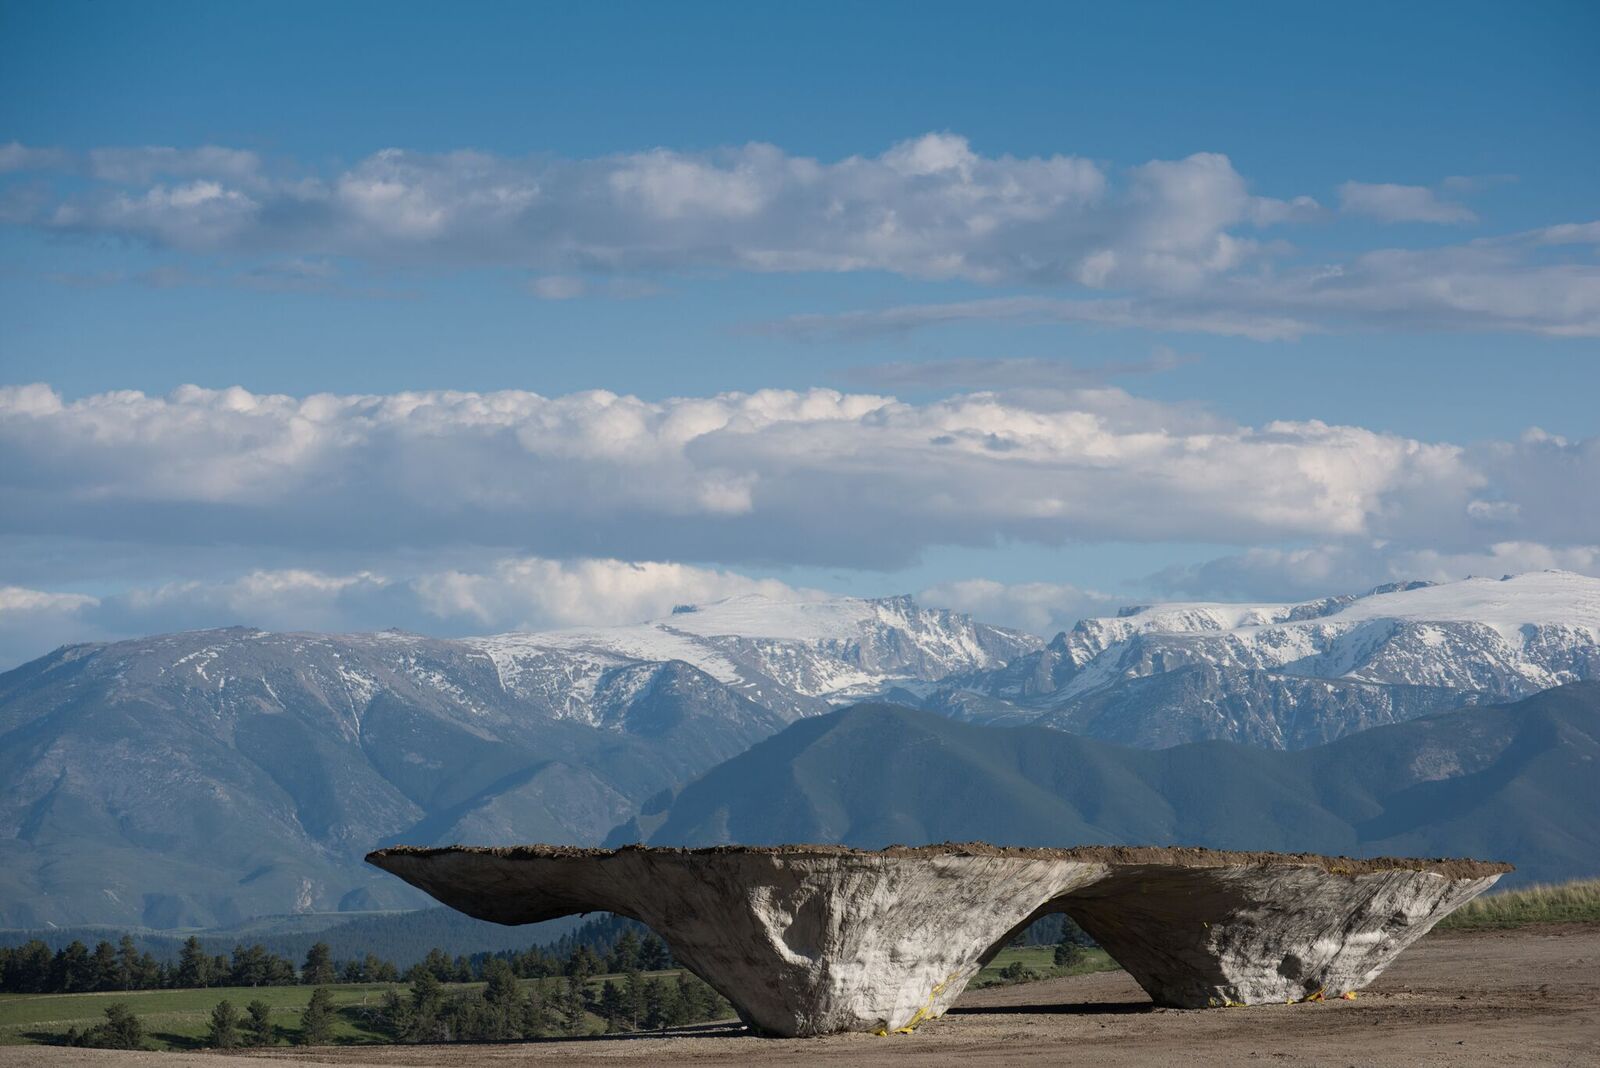 Domo, designed by EnsambleStudio (Antón García-Abril and Débora Mesa). Photo by Andre Costantini. Courtesy of Tippet Rise.